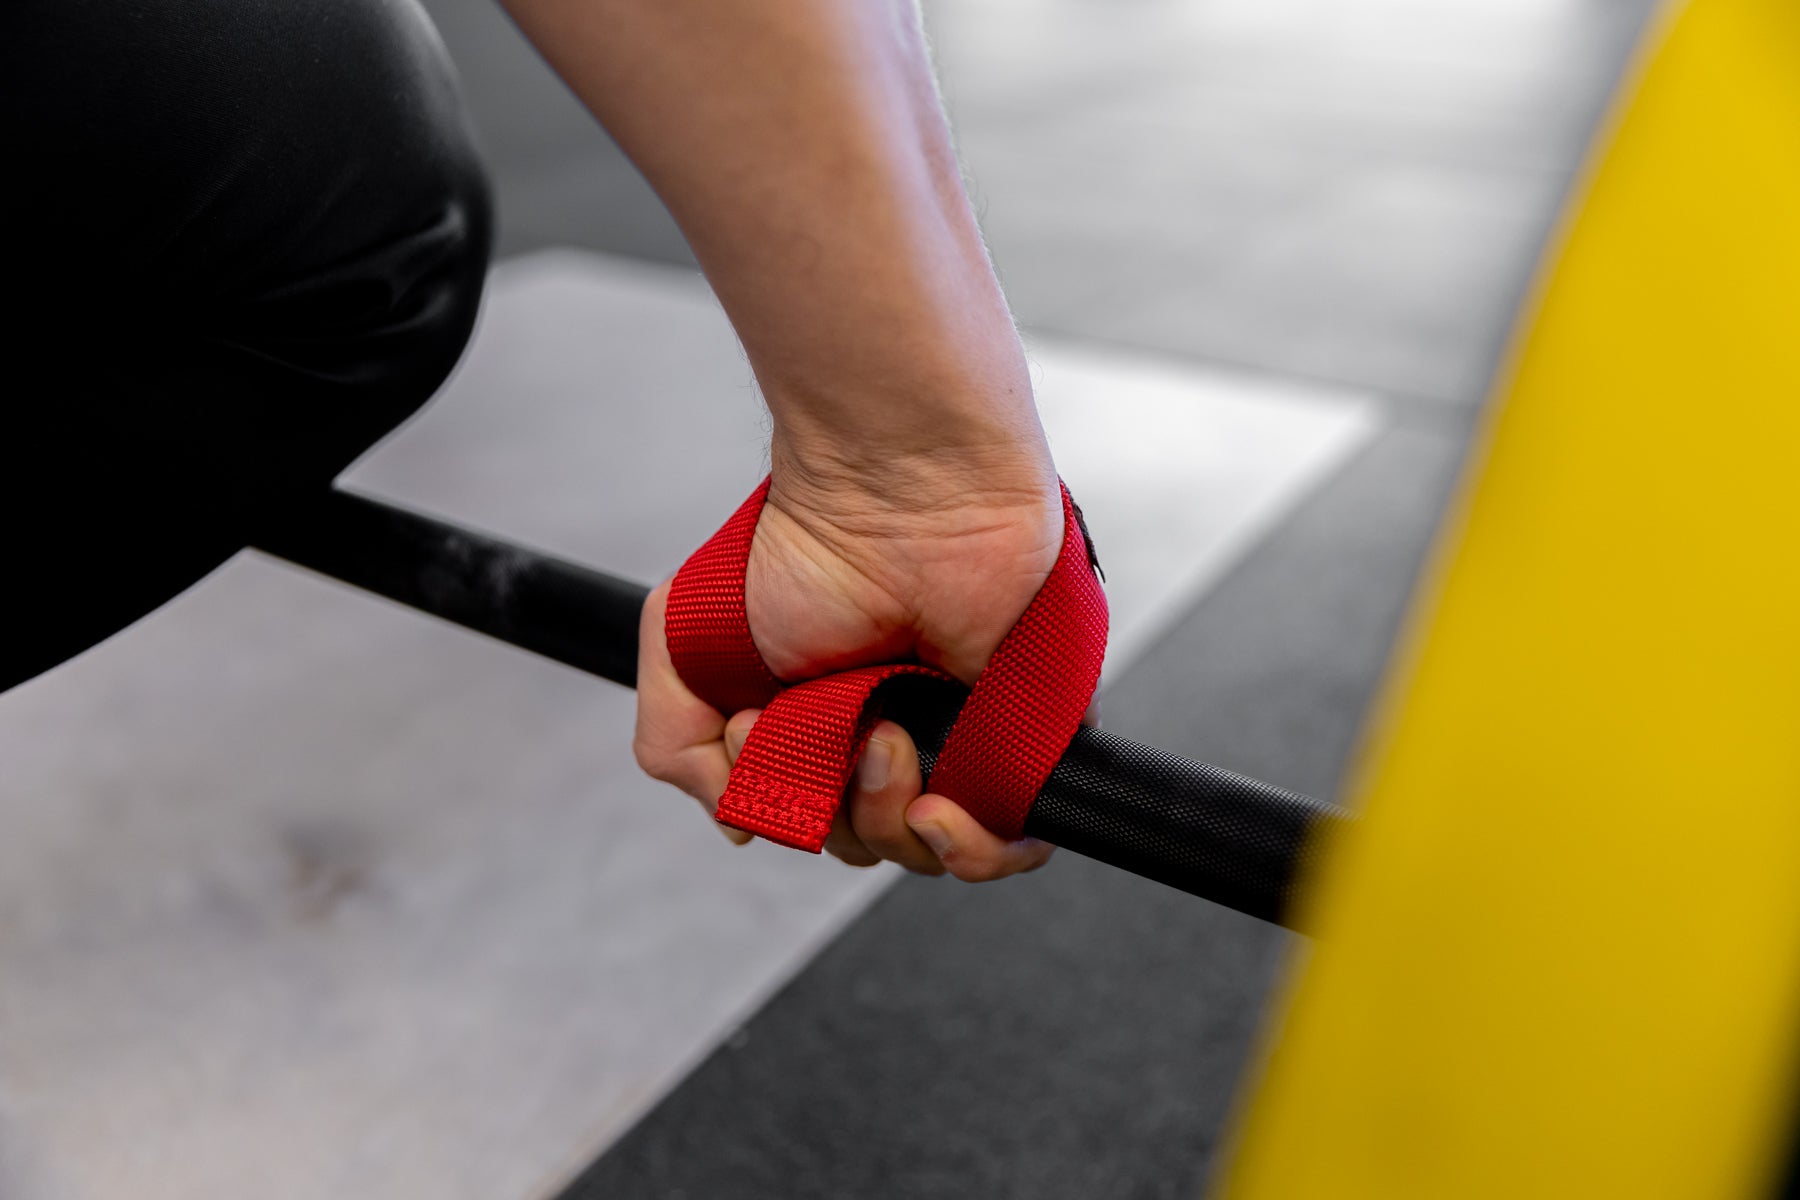 Close-up view of an athlete securing the right-sided red REP Olympic Lifting Strap to a loaded barbell.